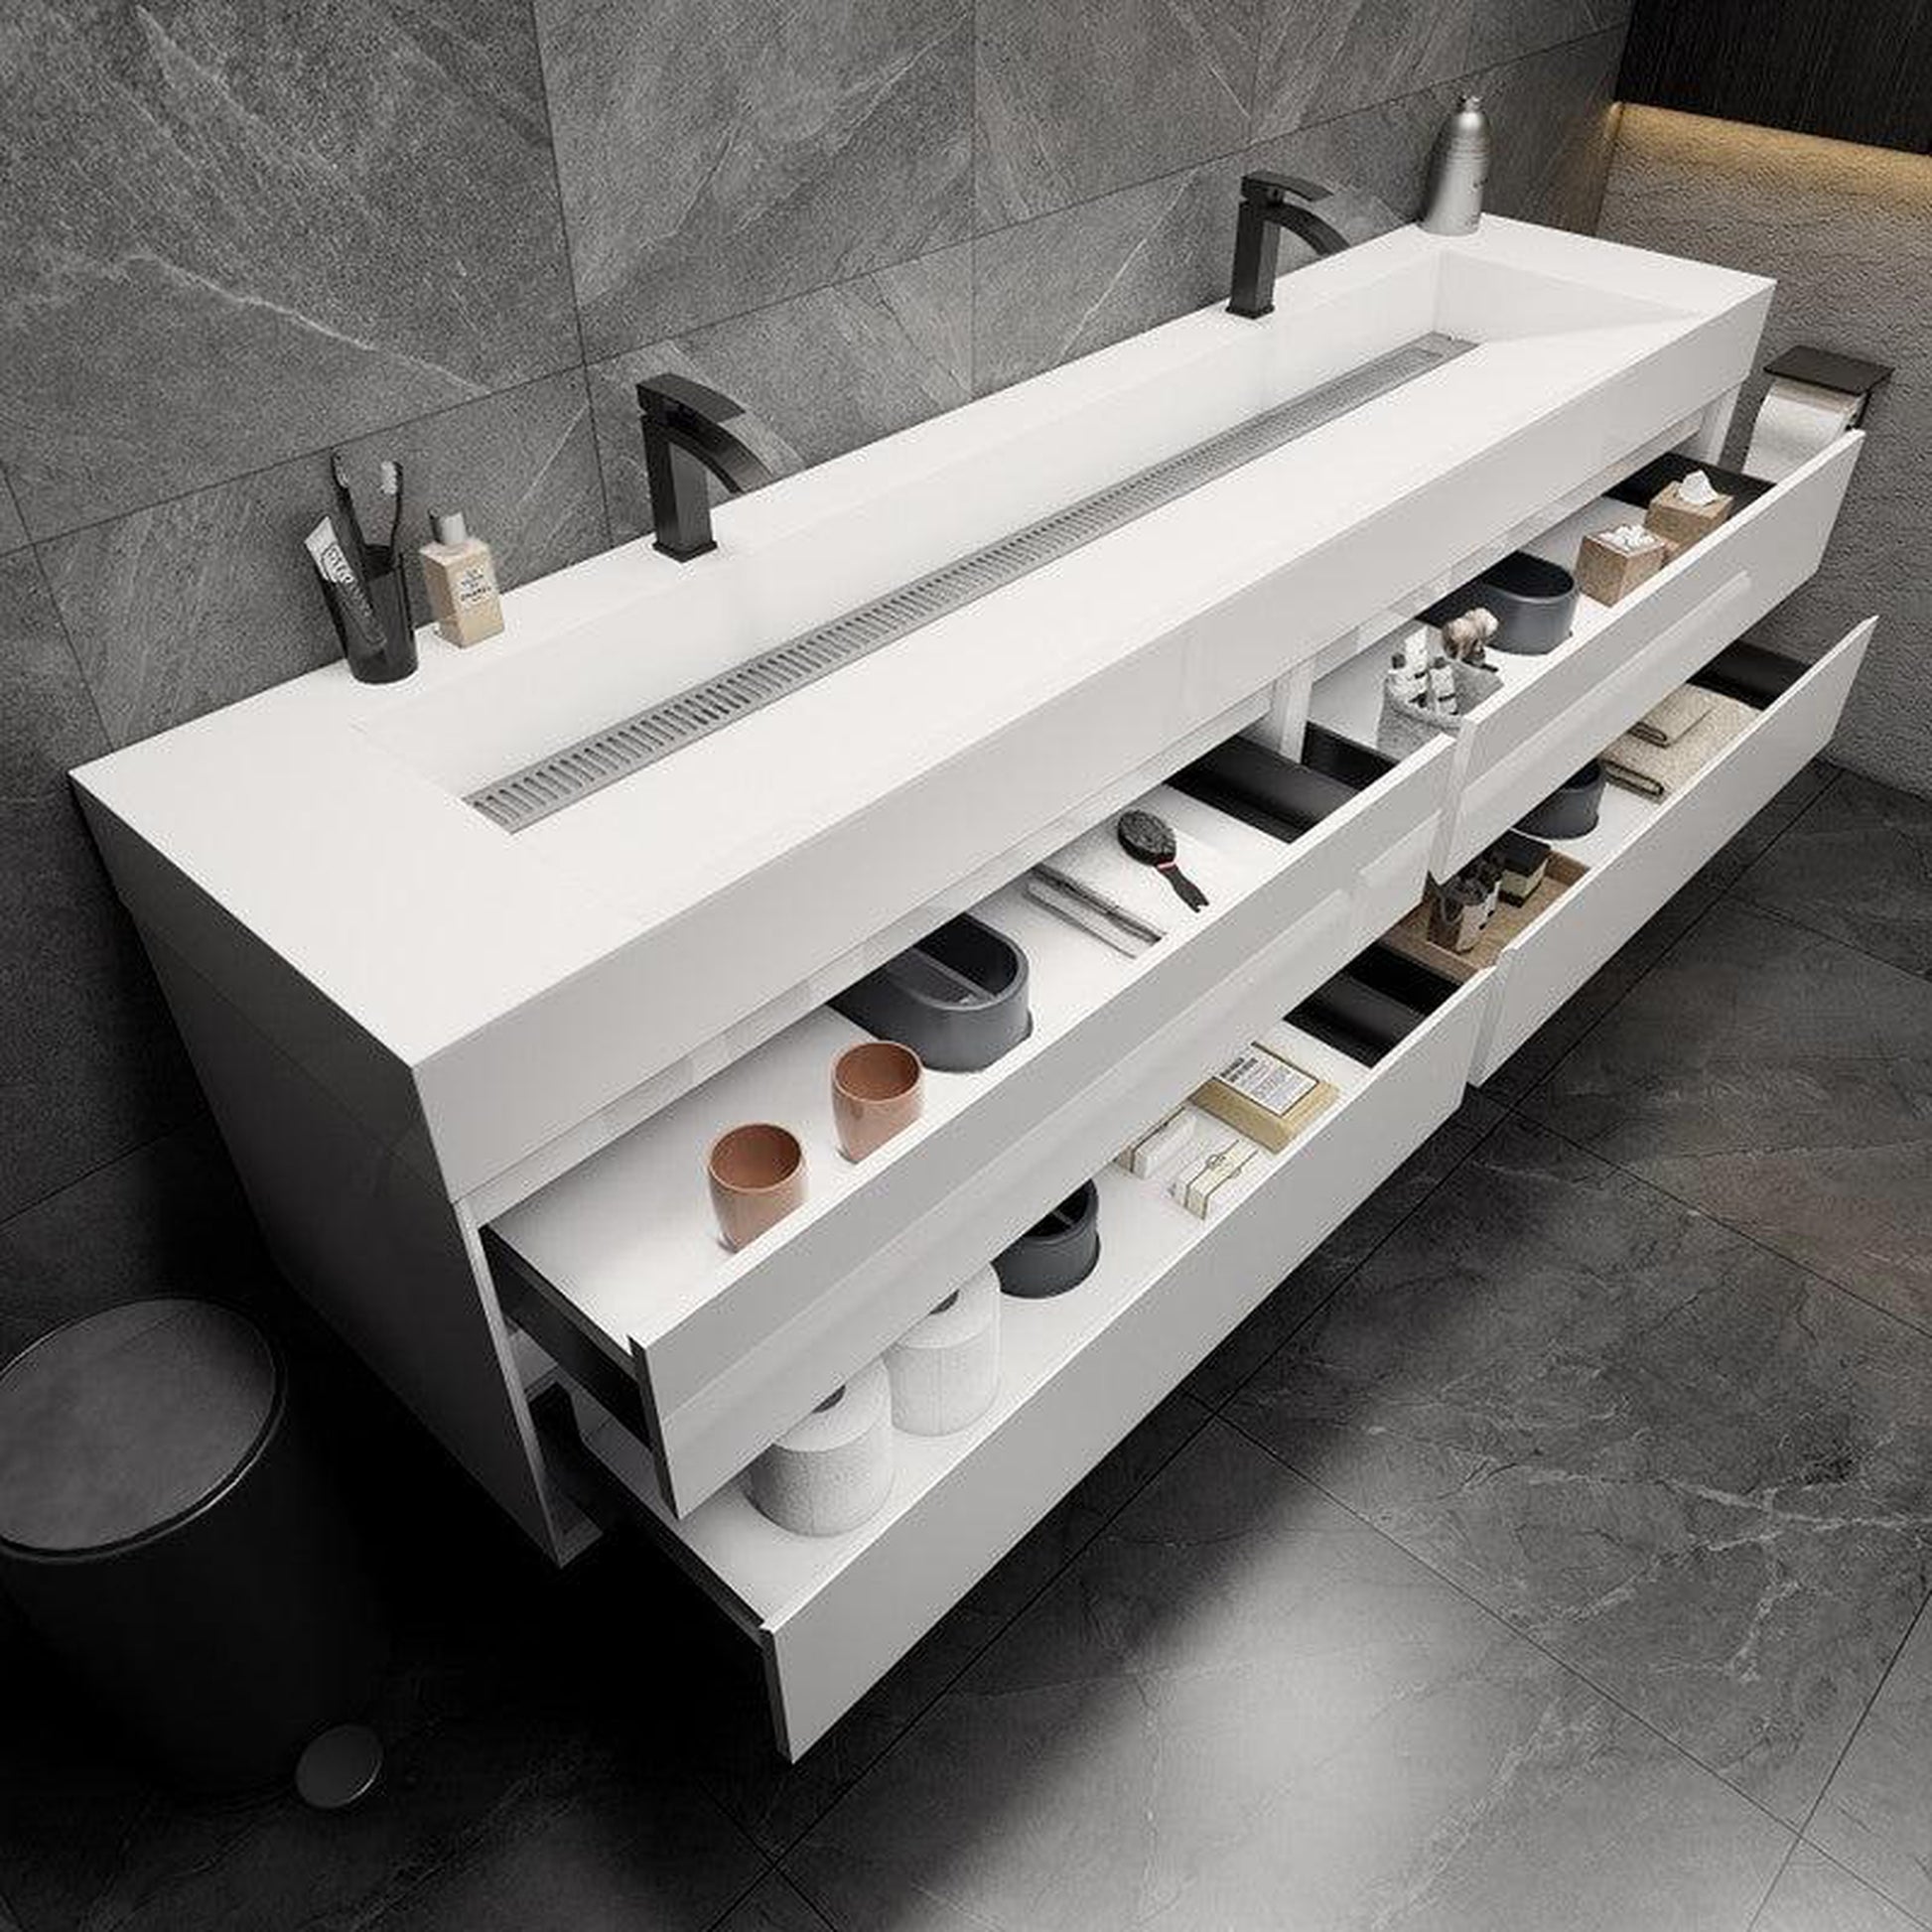 Moreno Bath MAX 84" Gloss White Wall-Mounted Vanity With Double Faucet Holes and Reinforced White Acrylic Sink